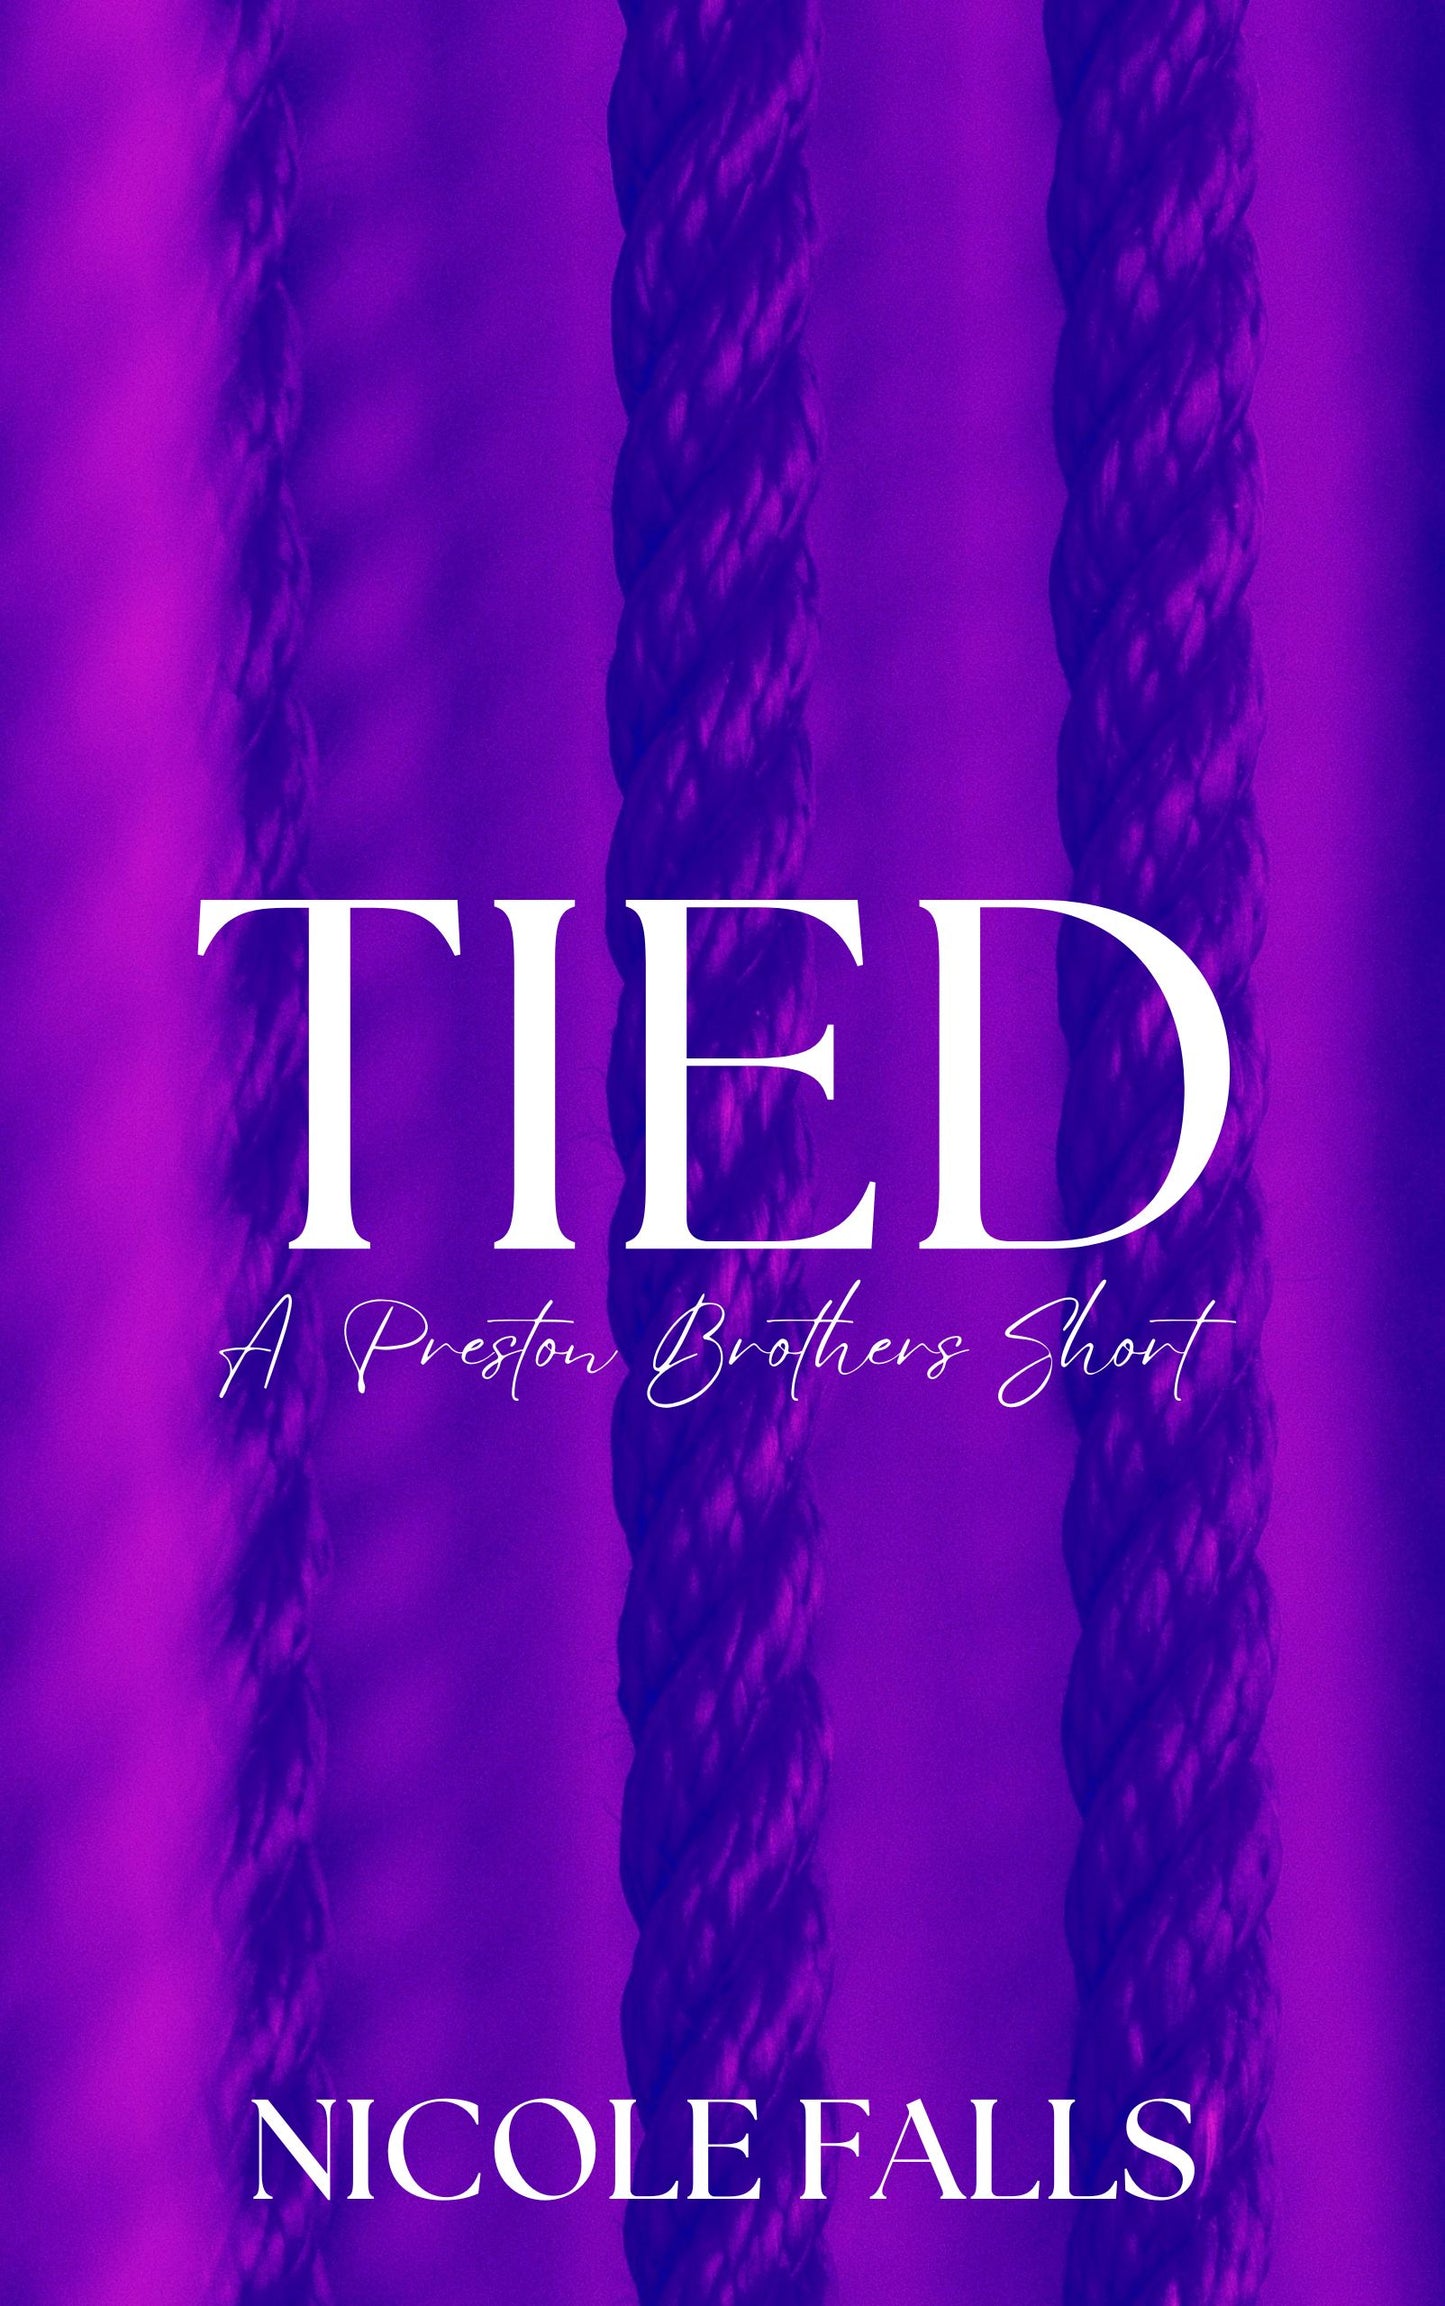 Tied: A Preston Brothers Short